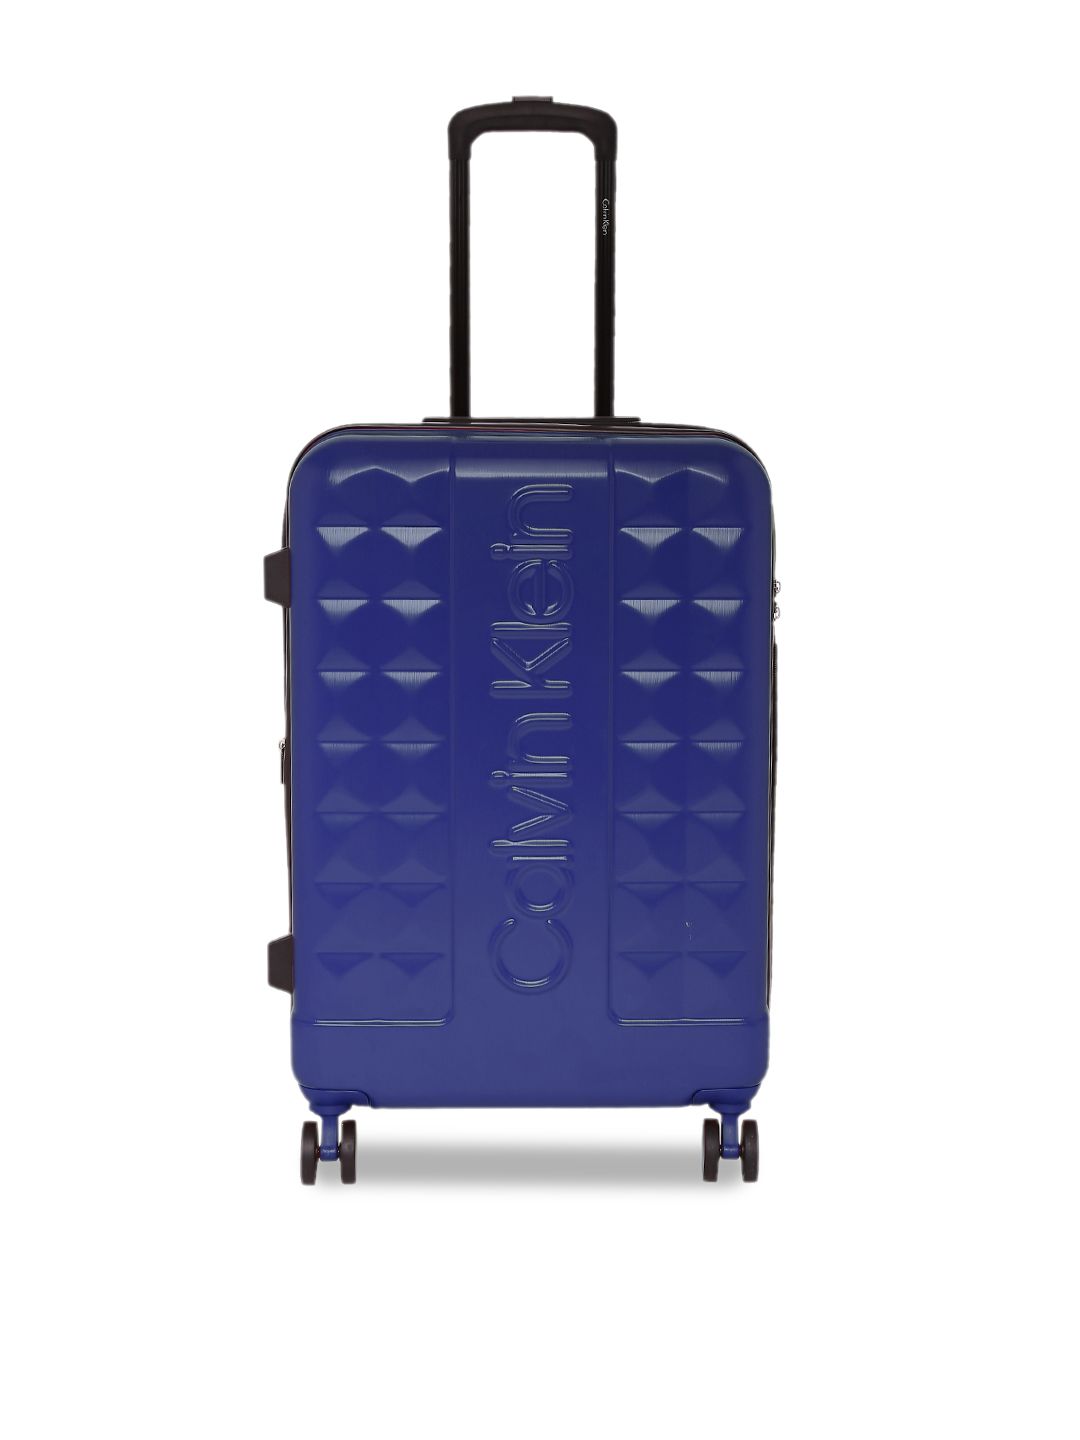 Calvin Klein Blue Central Park West Range Hard Large Luggage Price in India